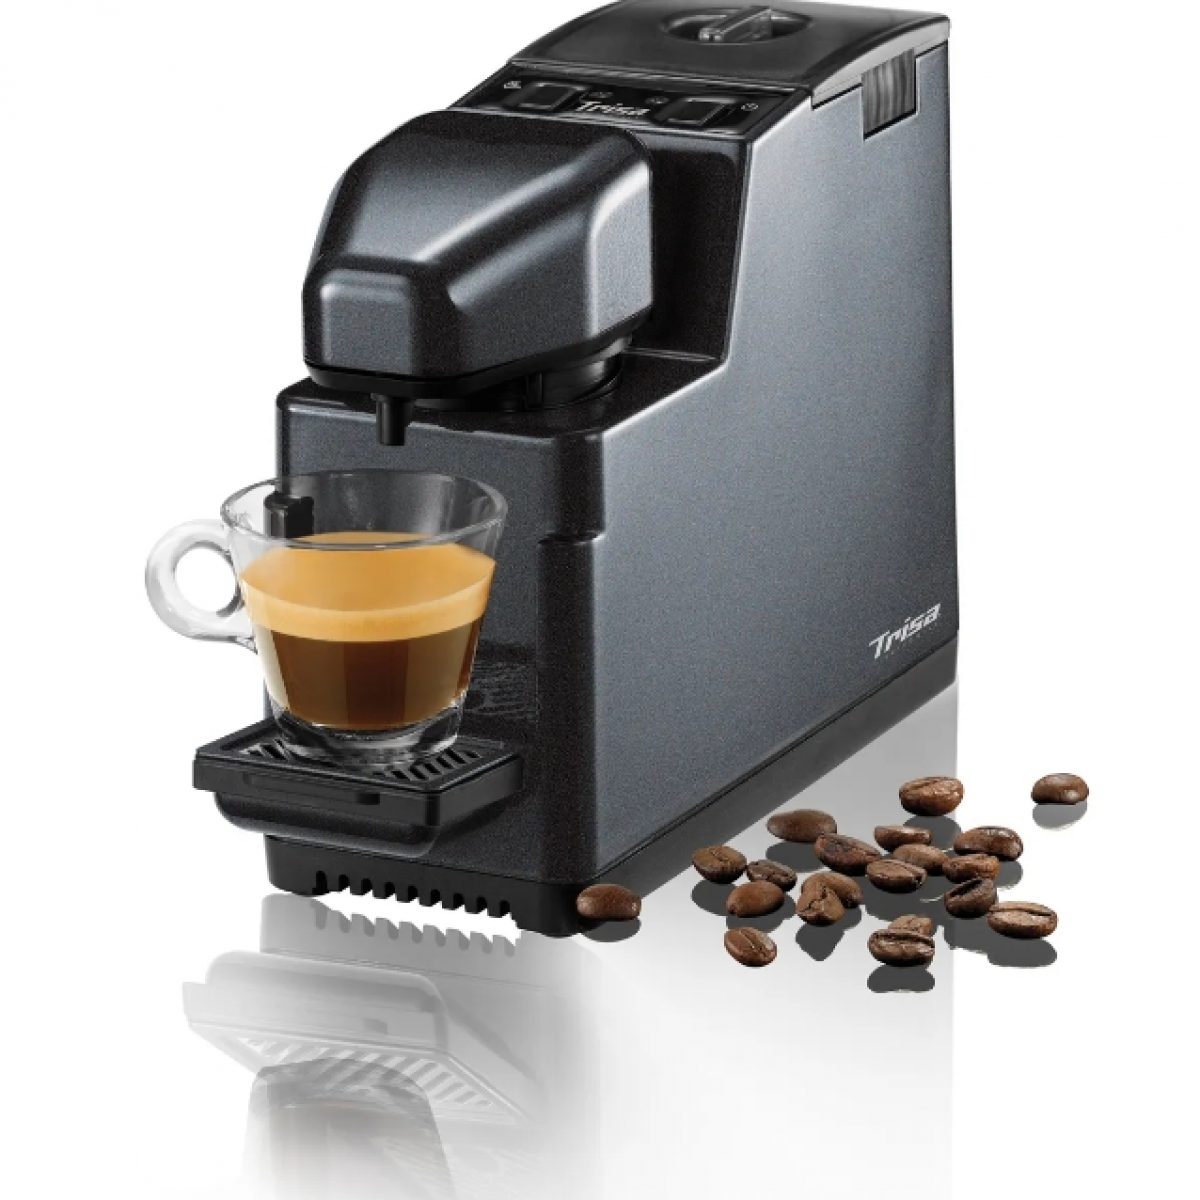 https://cellularnews.com/wp-content/uploads/2023/08/12-amazing-battery-operated-coffee-maker-for-2023-1692930920-1200x1200.jpg